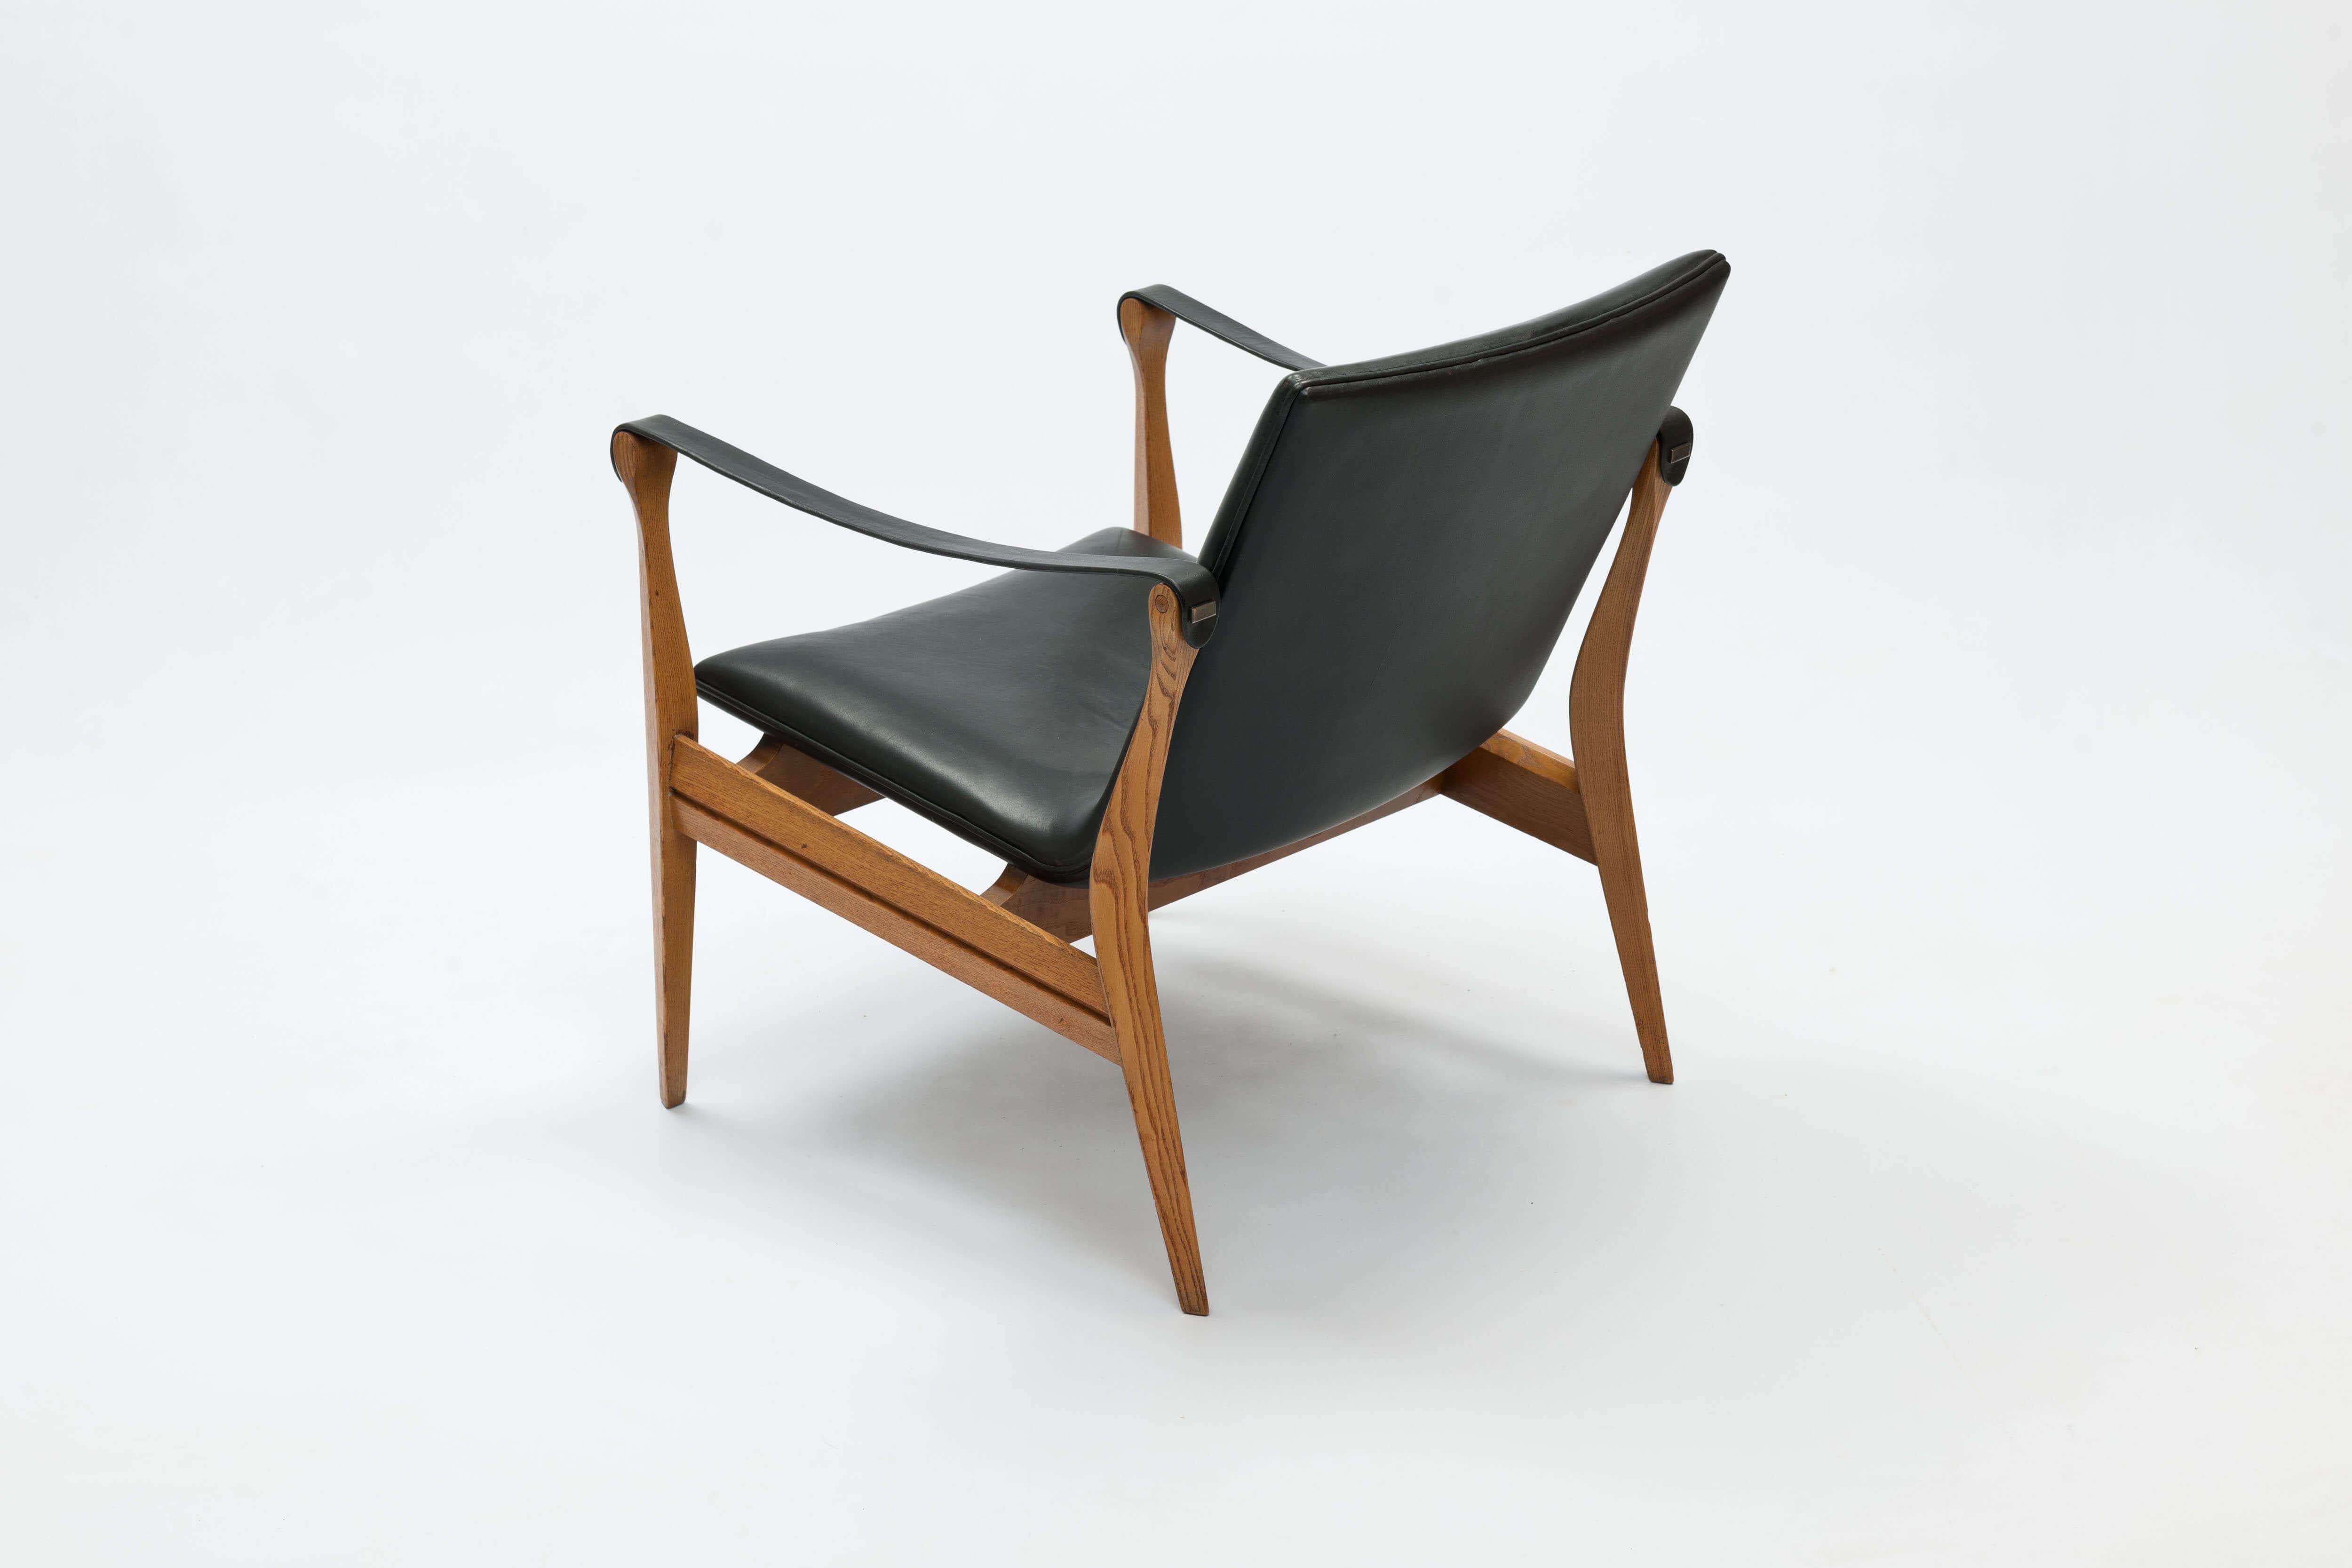 Easy chair model 4305 was designed in 1959 by Danish designers Karen and Ebbe Clemmensen and is executed in beautiful carpentry-works by Fritz Hansen.

Solid ash frame with sharp lines and all new black leather upholstery and sloping safari chair